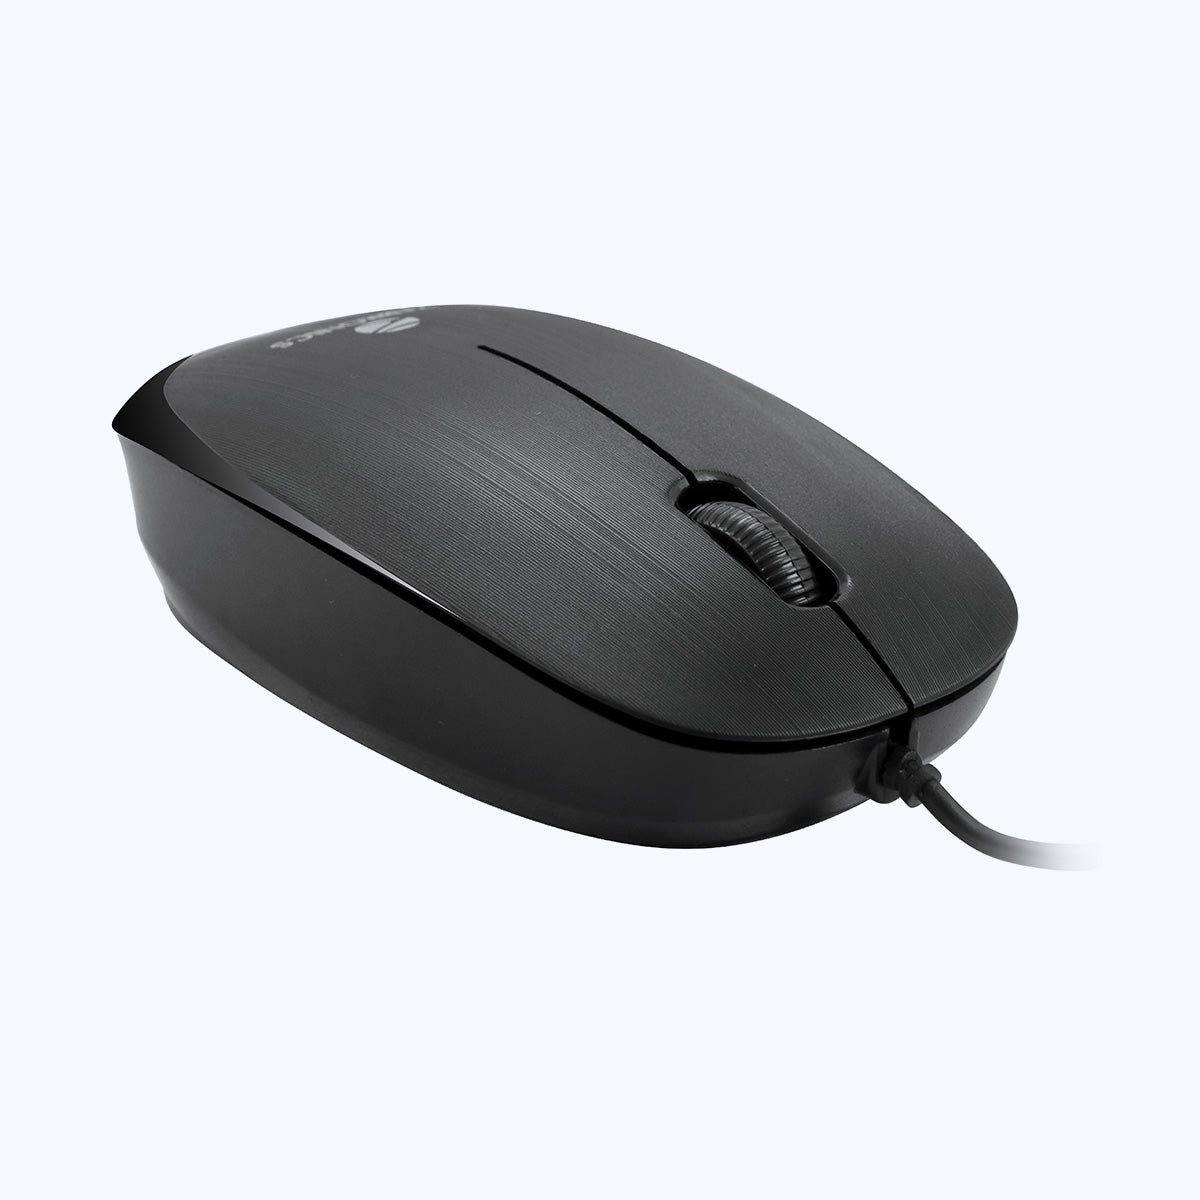 Zeb-Power - Wired Mouse - Zebronics